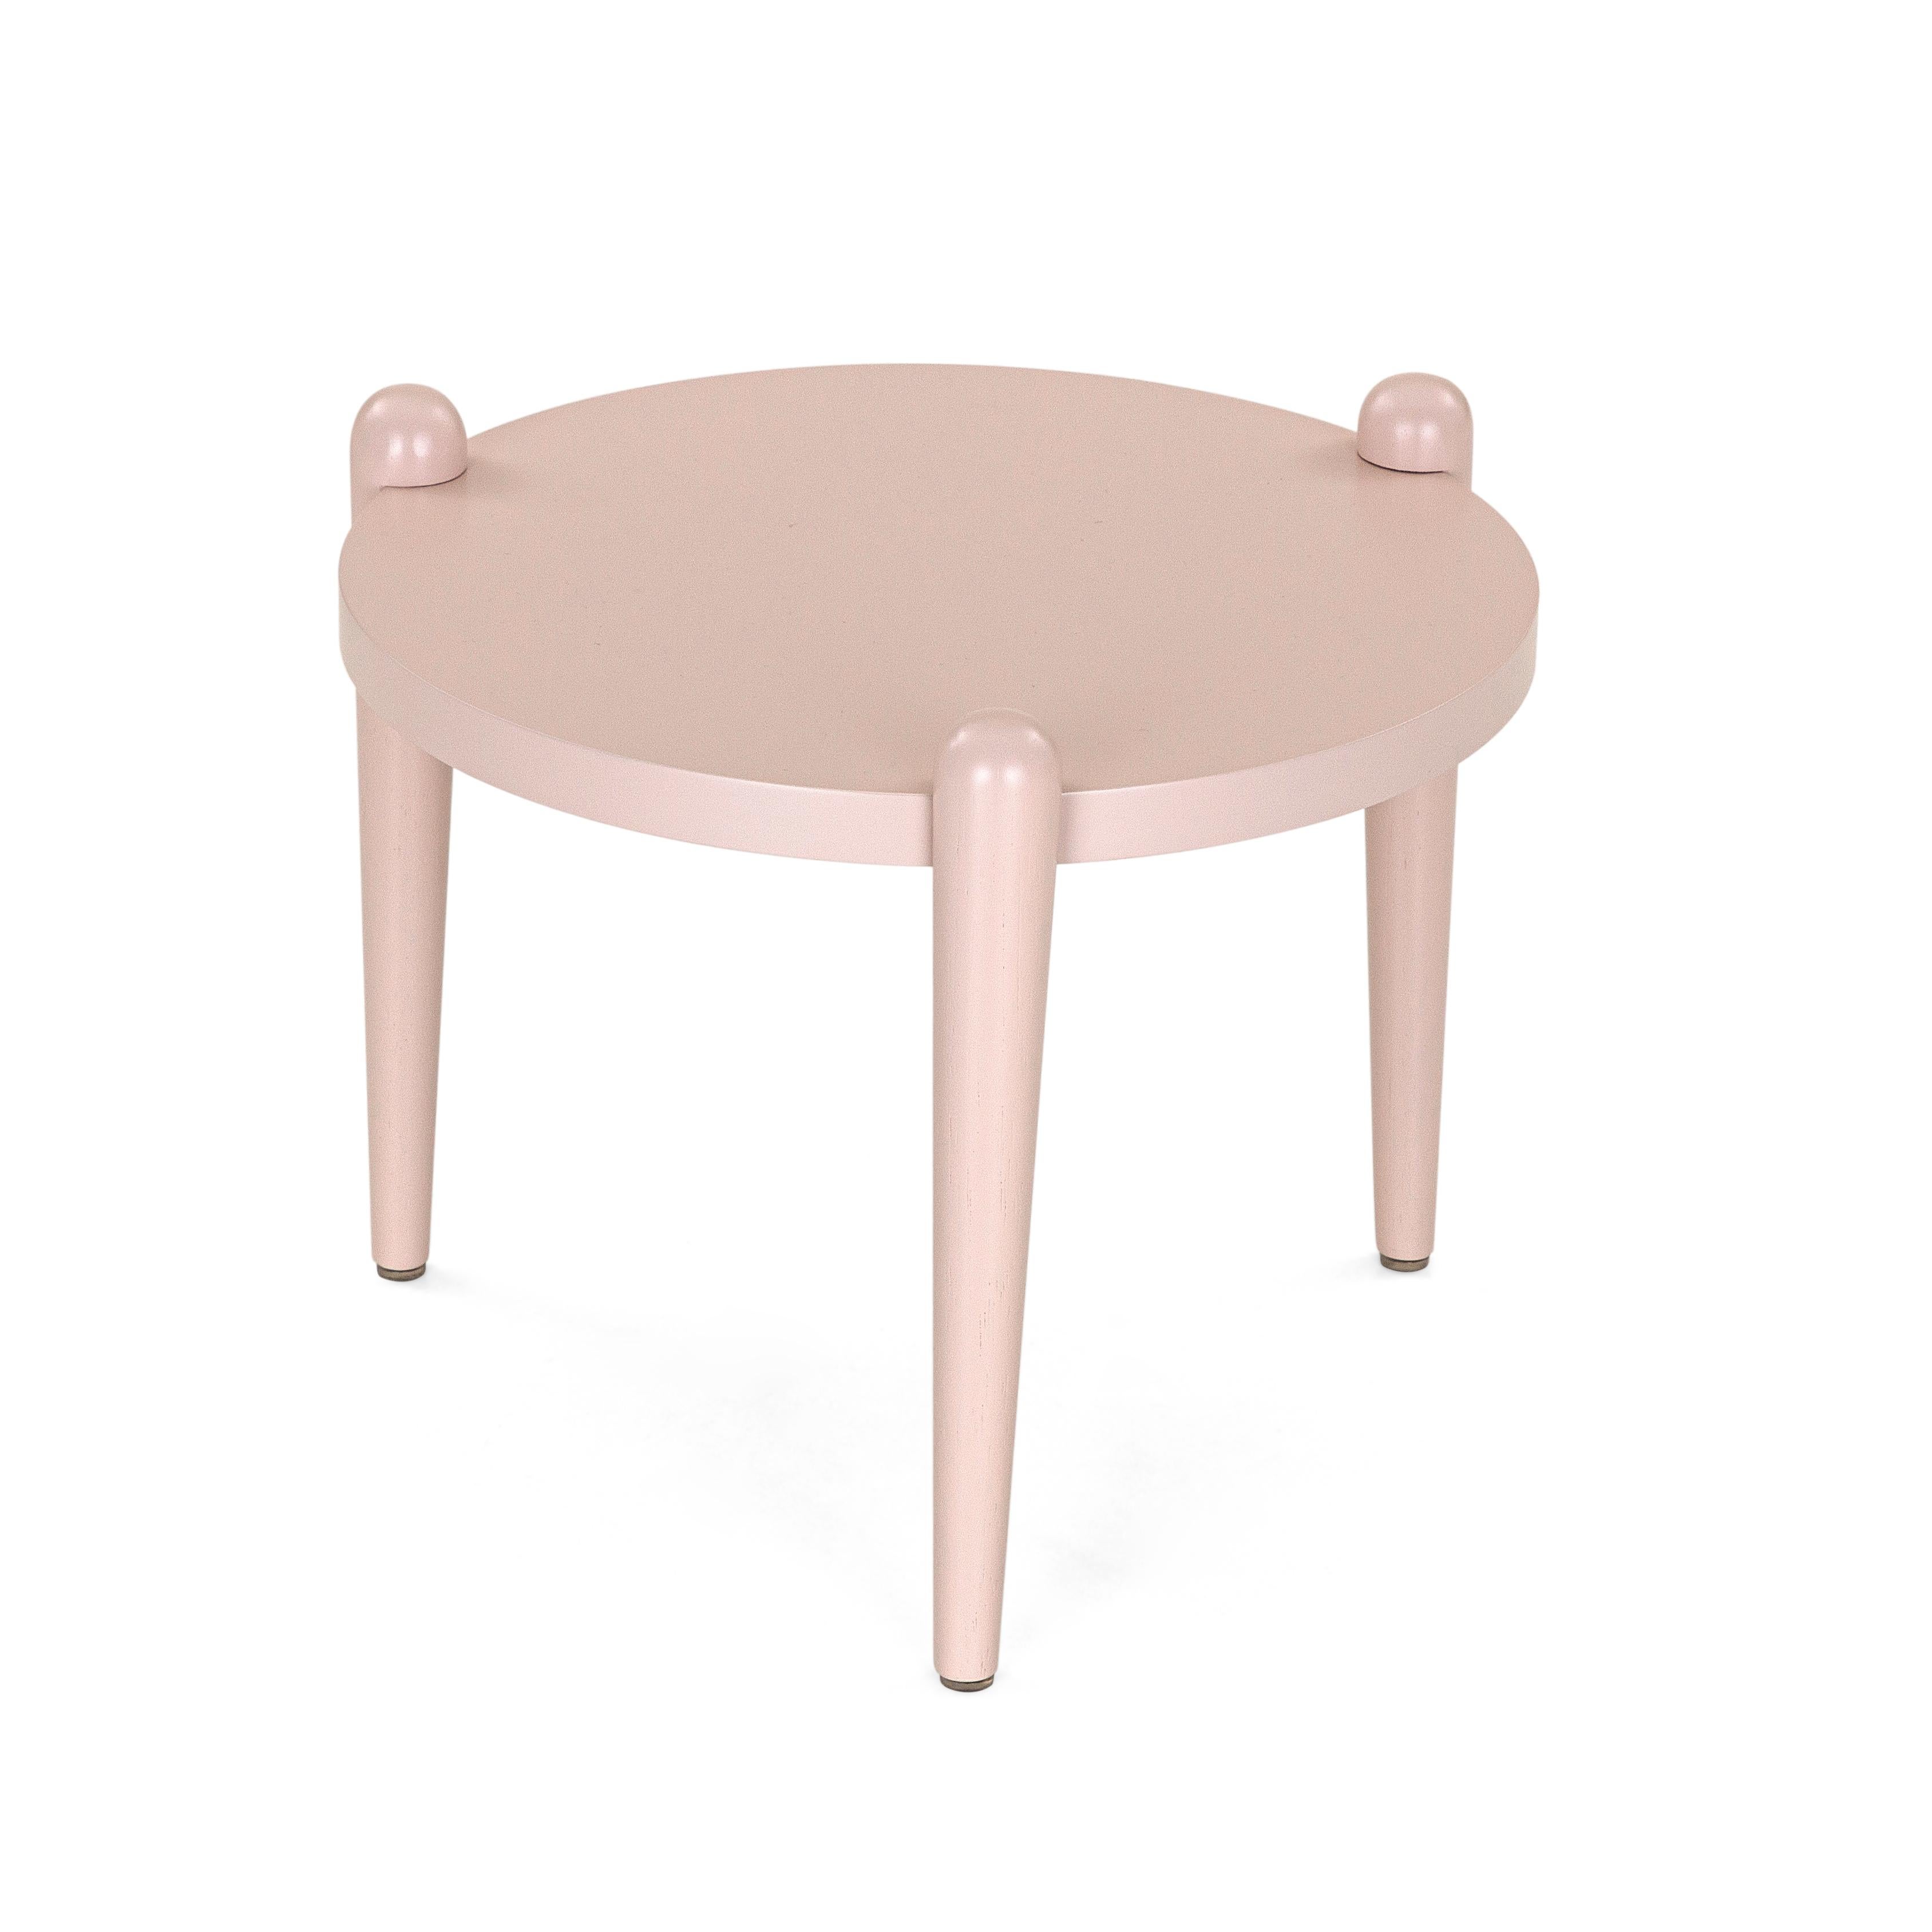 Pan Contemporary Side Tables in Light Pink Quartz Finish, Set of 3 In New Condition For Sale In Miami, FL